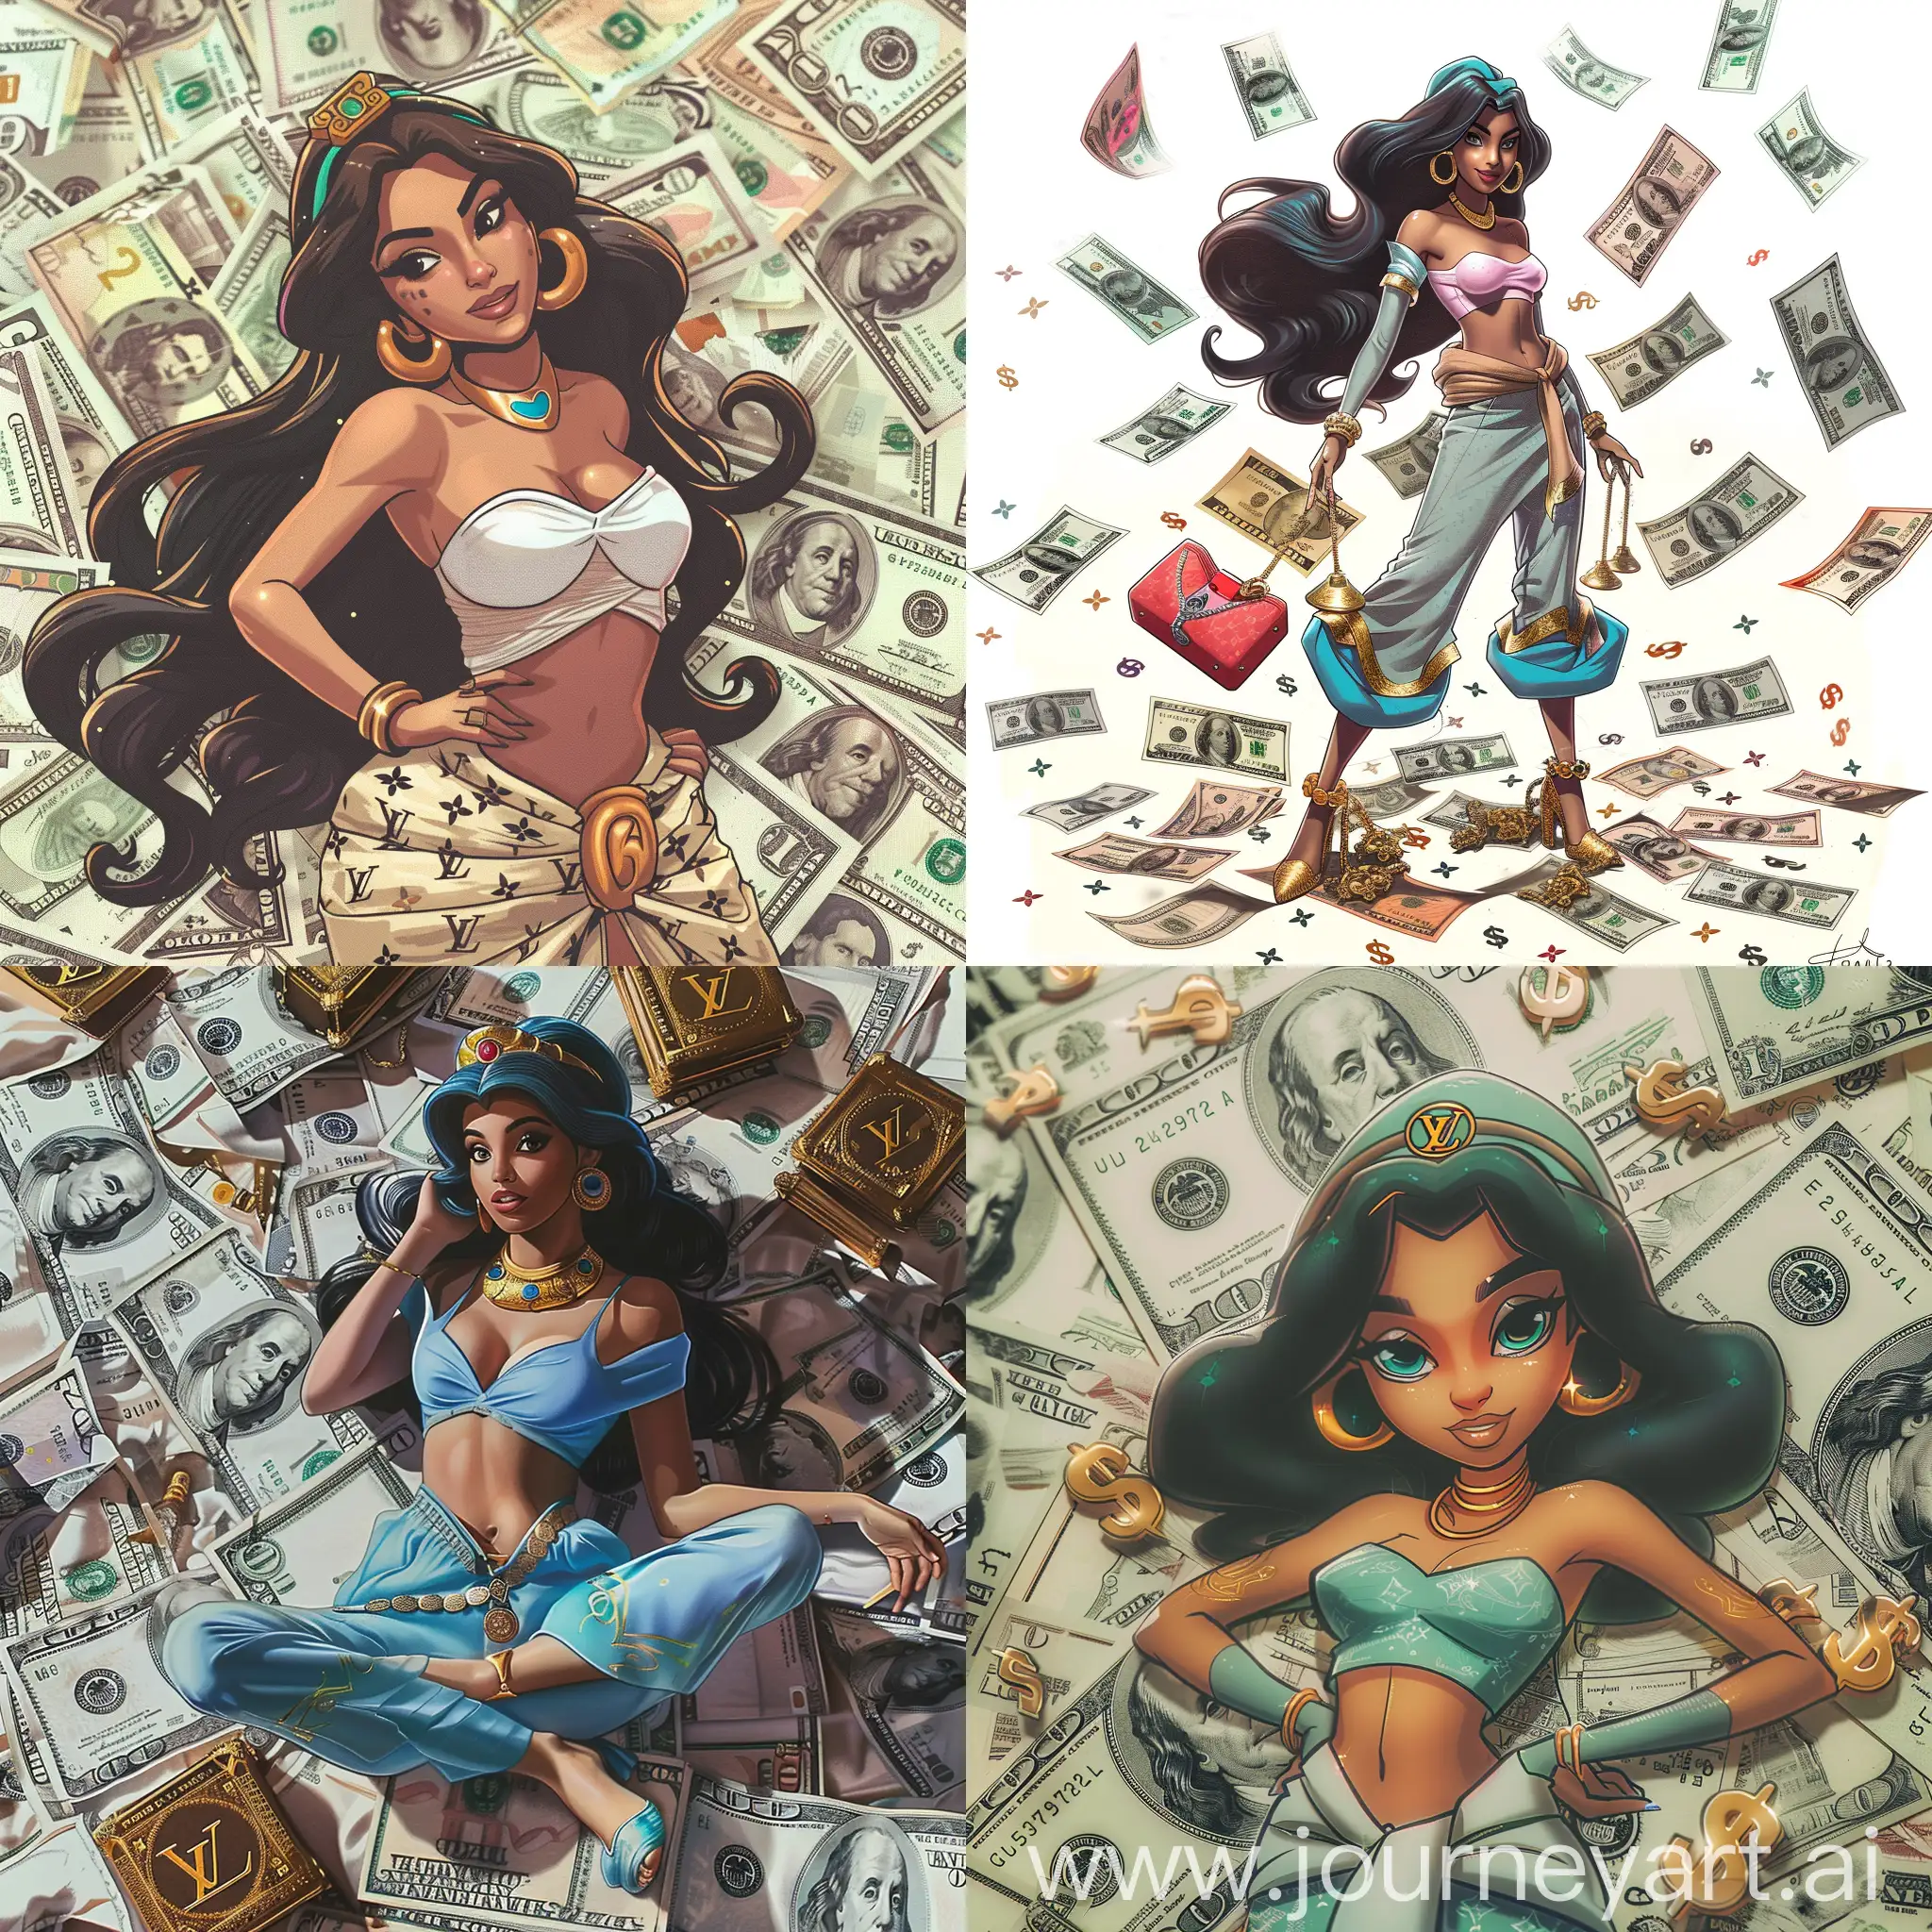 Princess-Jasmine-Surrounded-by-Luxury-Brands-in-Drawn-Style